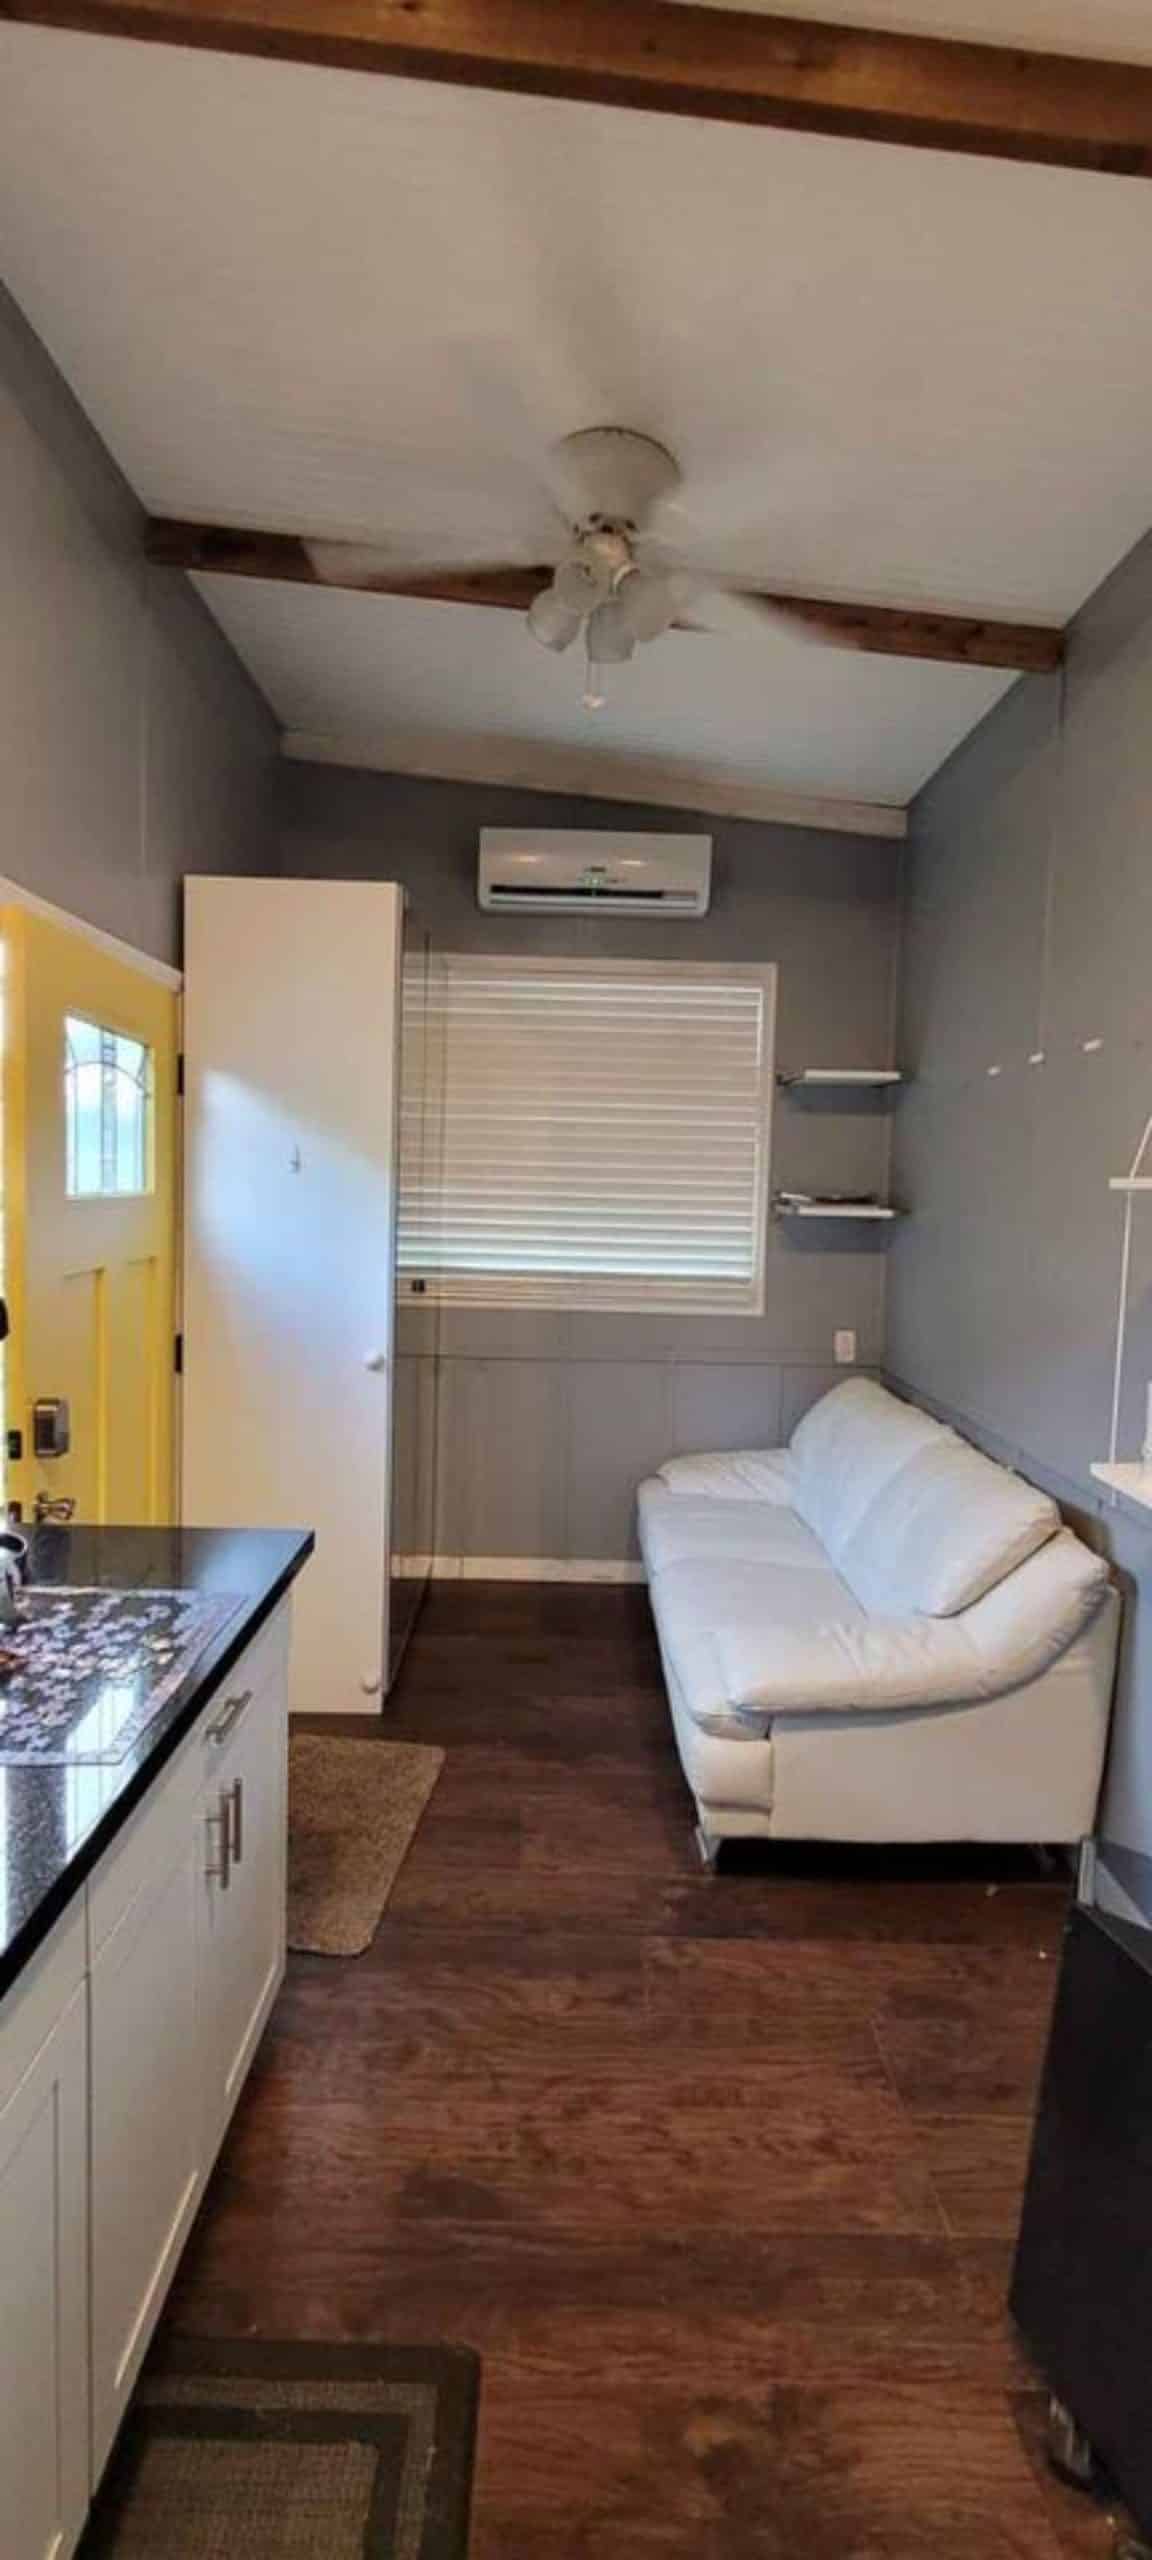 Living area of 1 bedroom tiny home